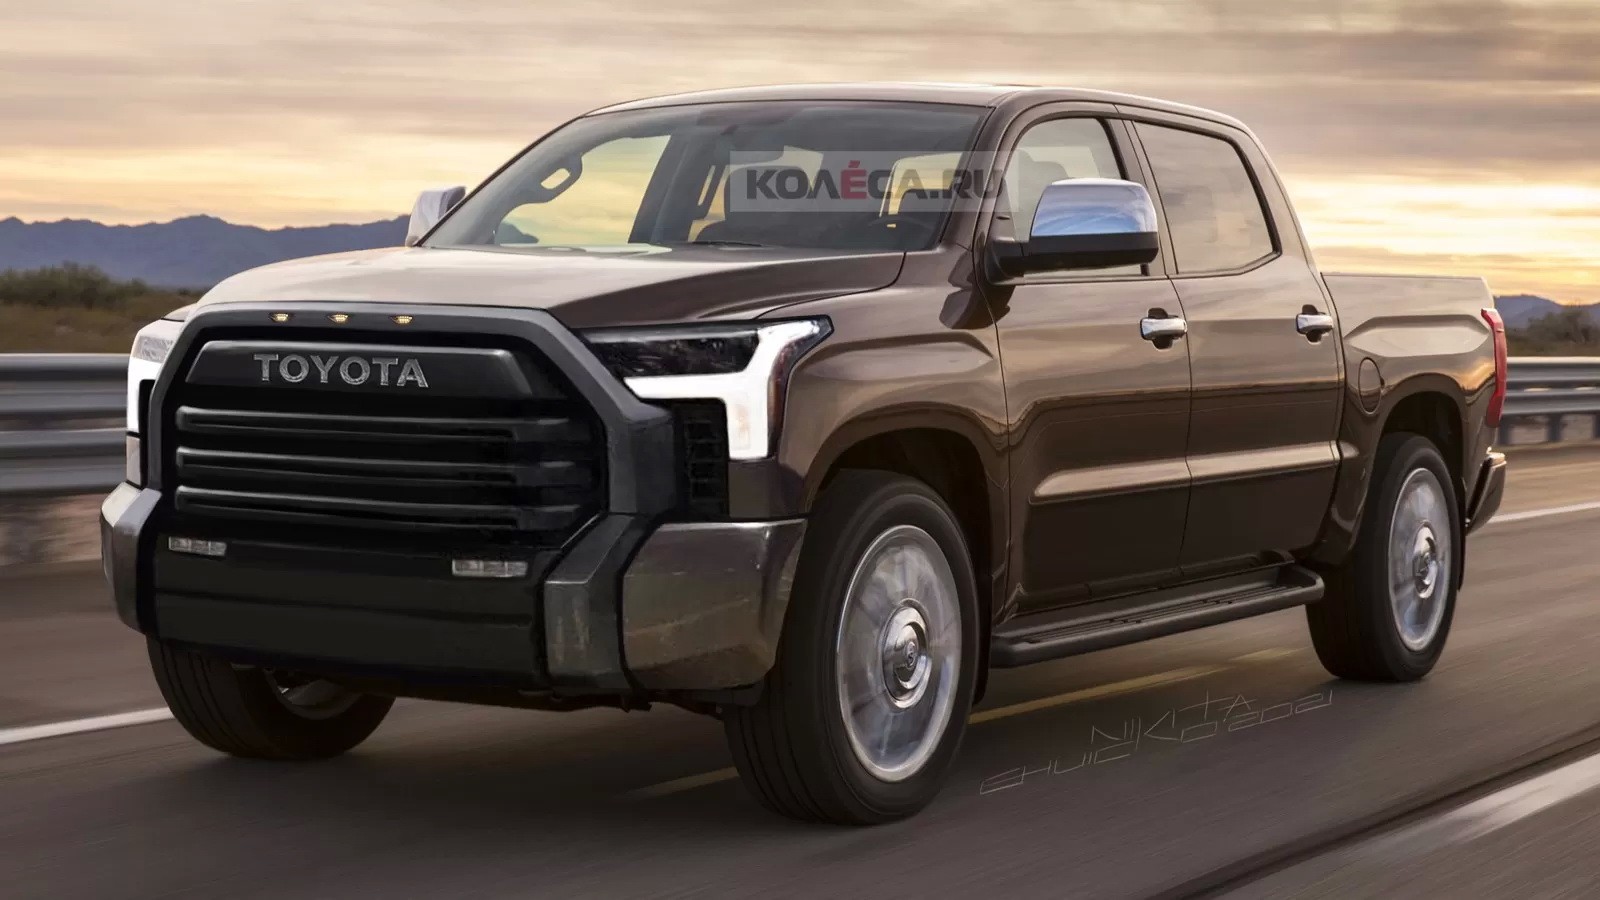 2022 Toyota Tundra V6 Engine Confirmed, It's Called iForce MAX